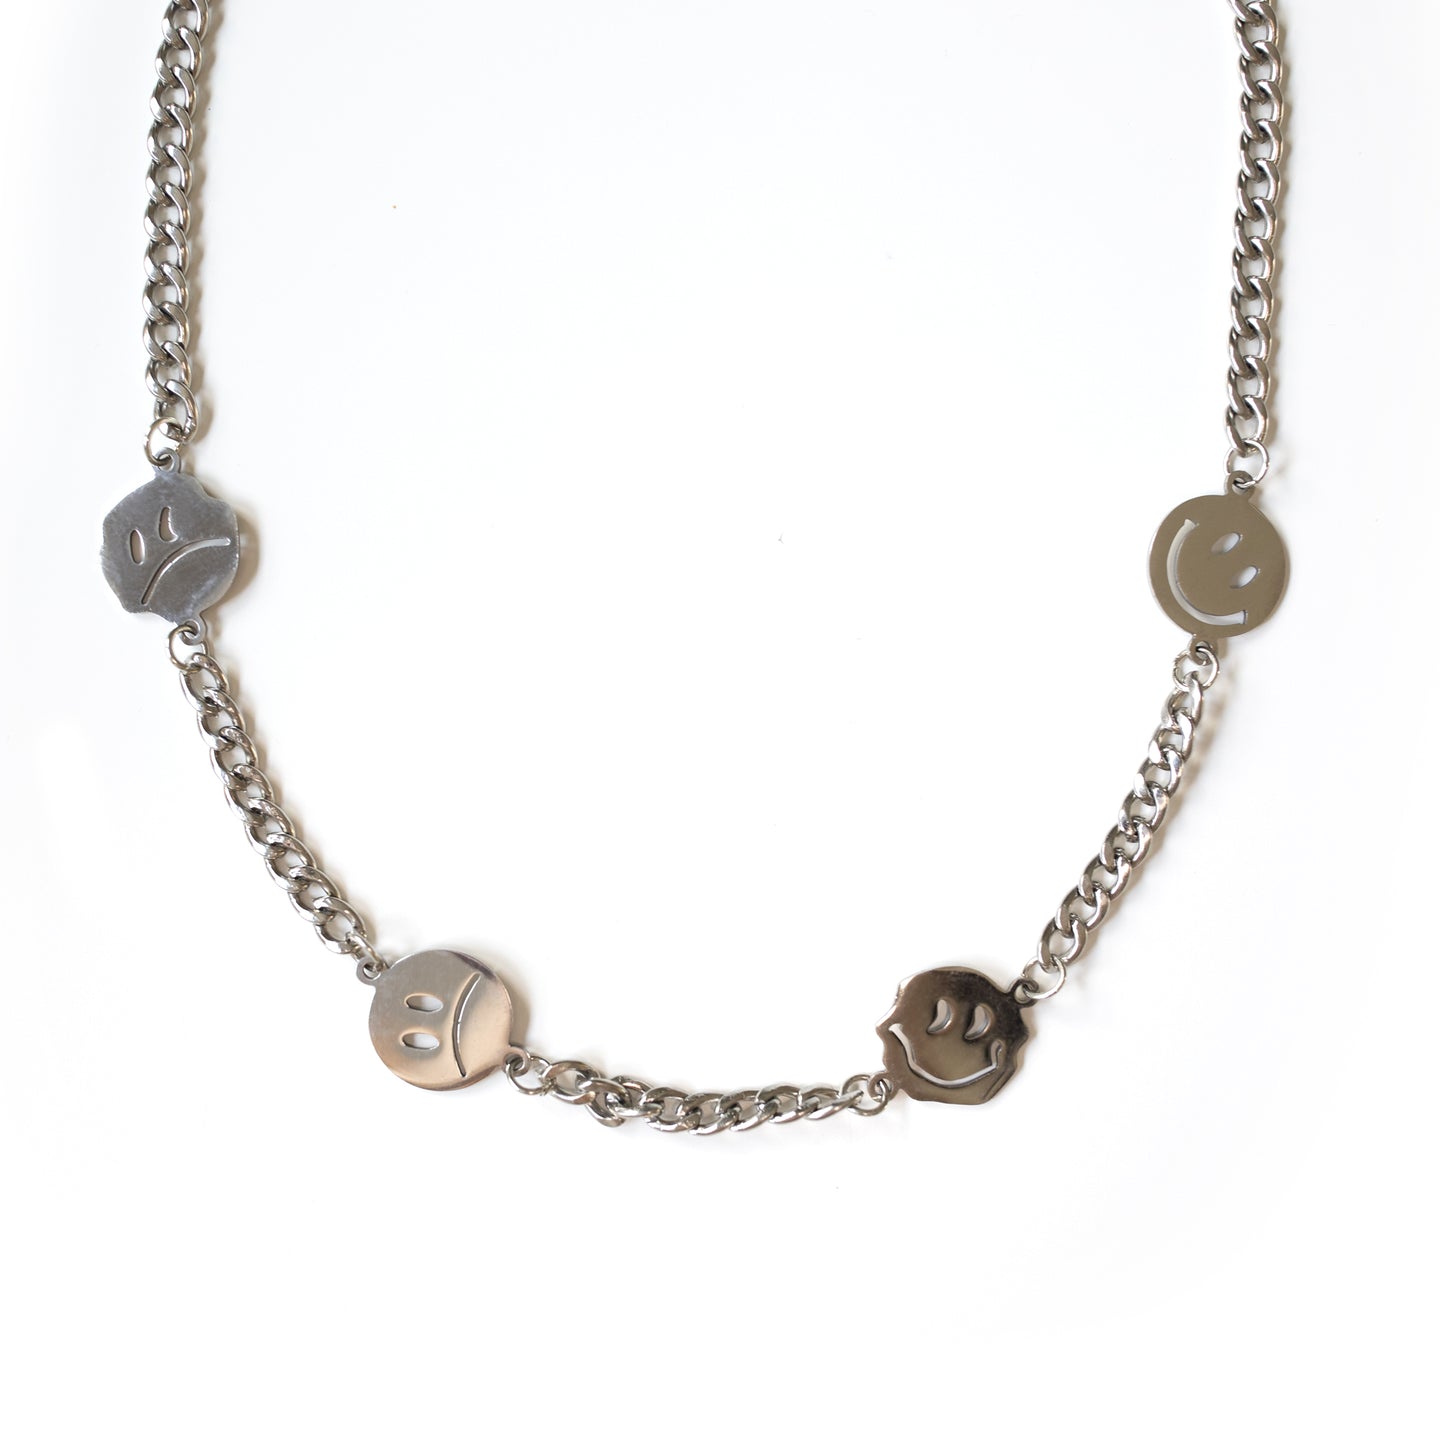 Mixed Emotions Necklace